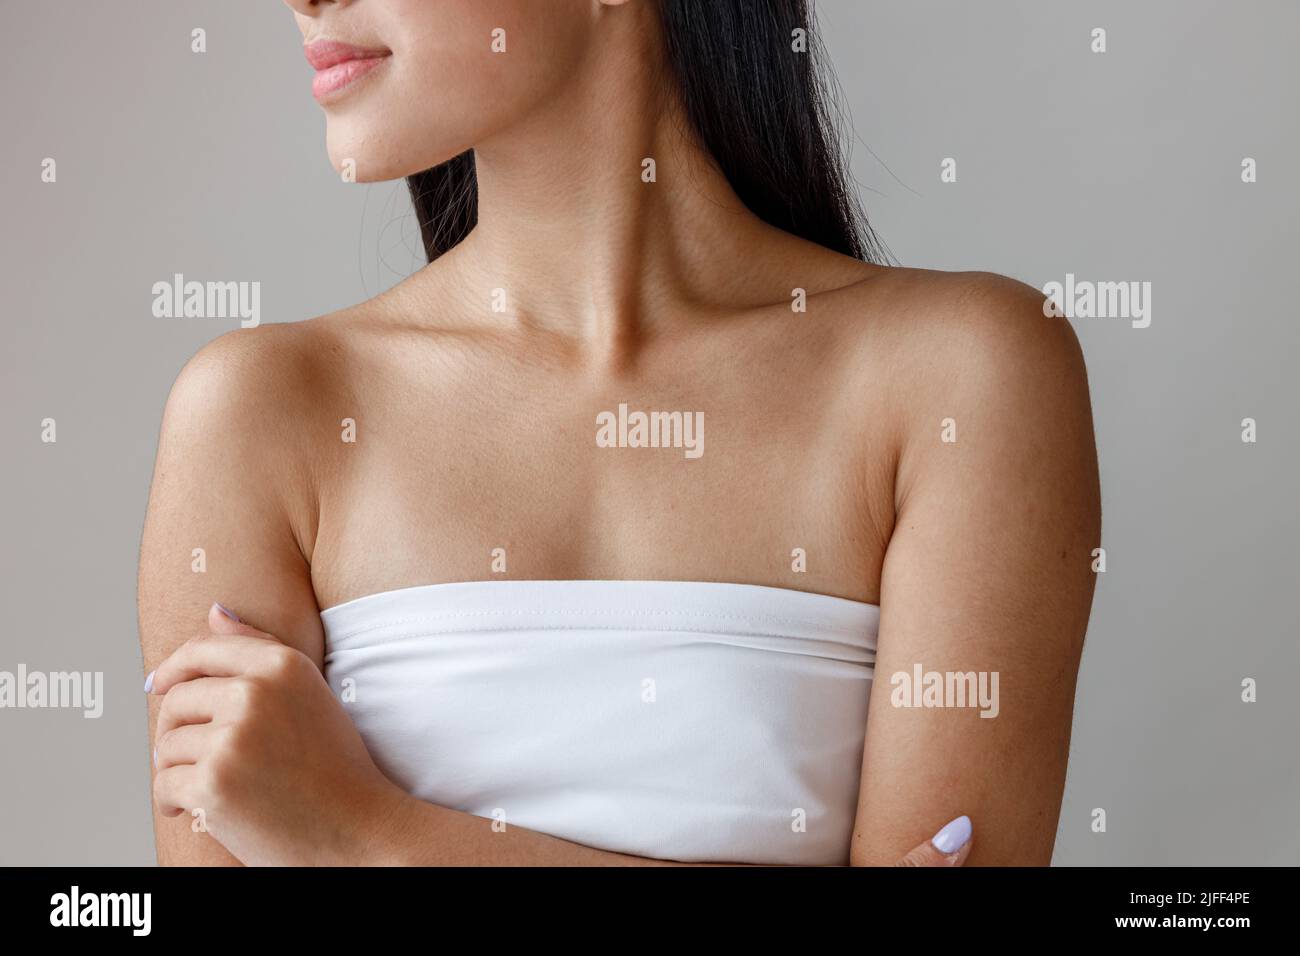 Asian young woman with perfect skin standing in studio Stock Photo